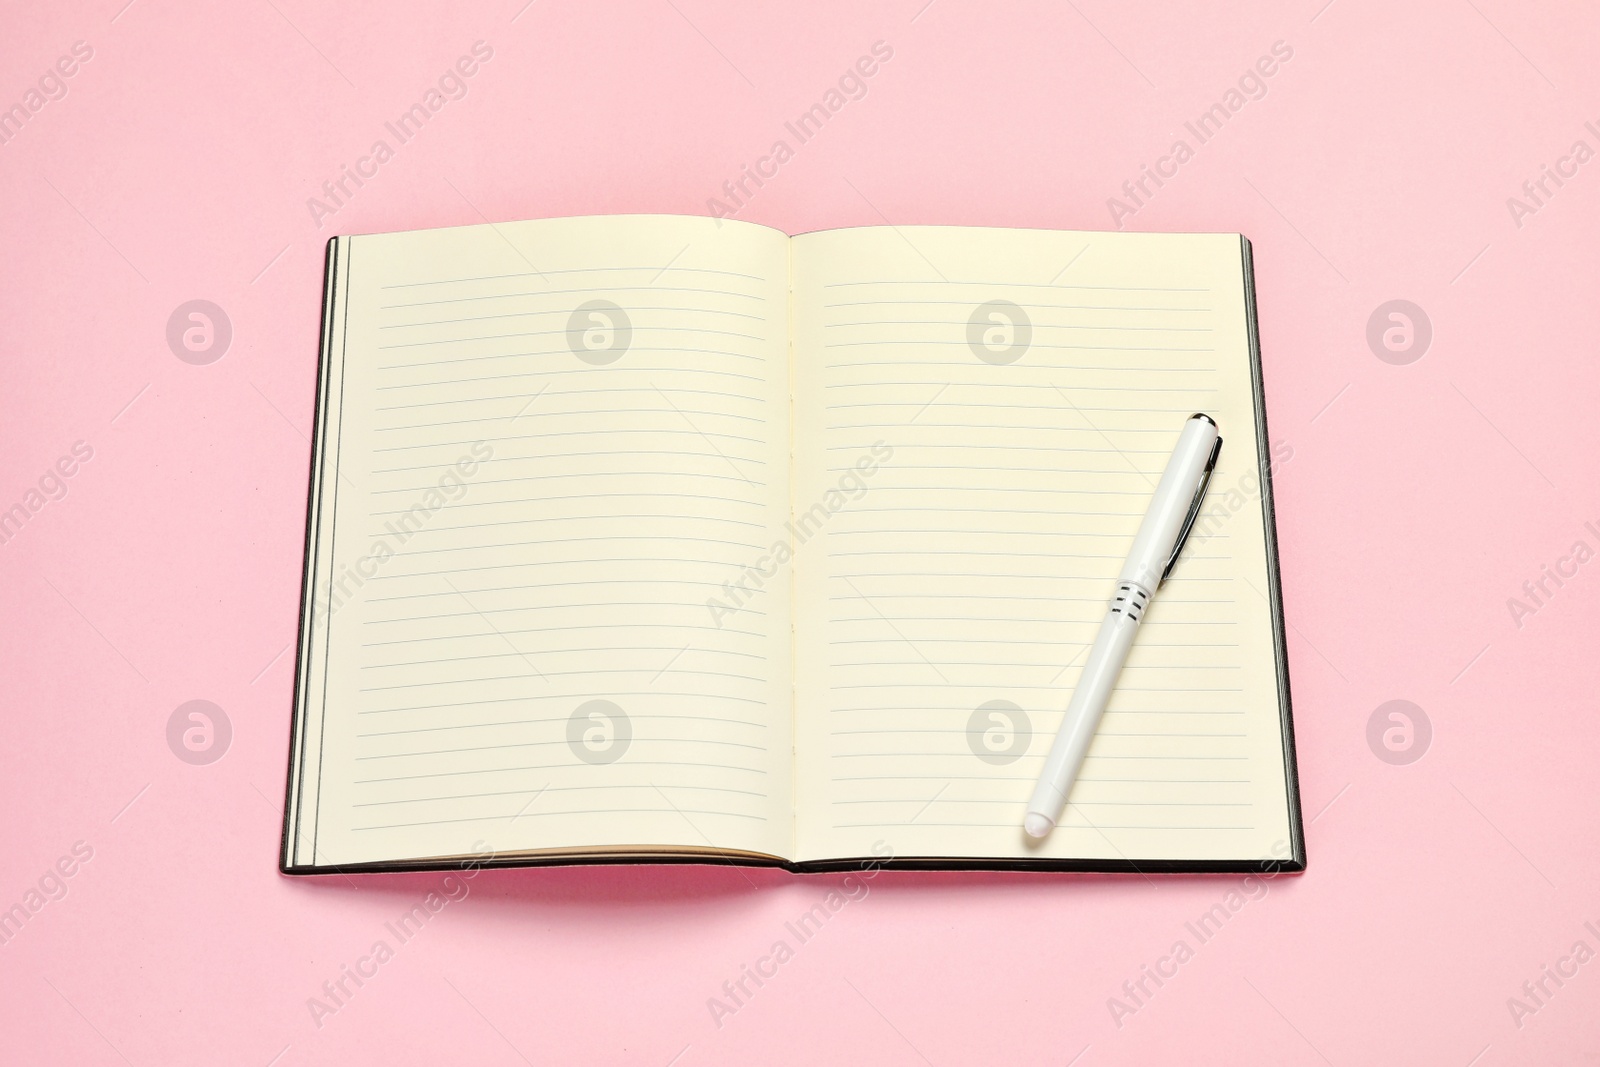 Photo of Open planner with pen on colorful background, above view